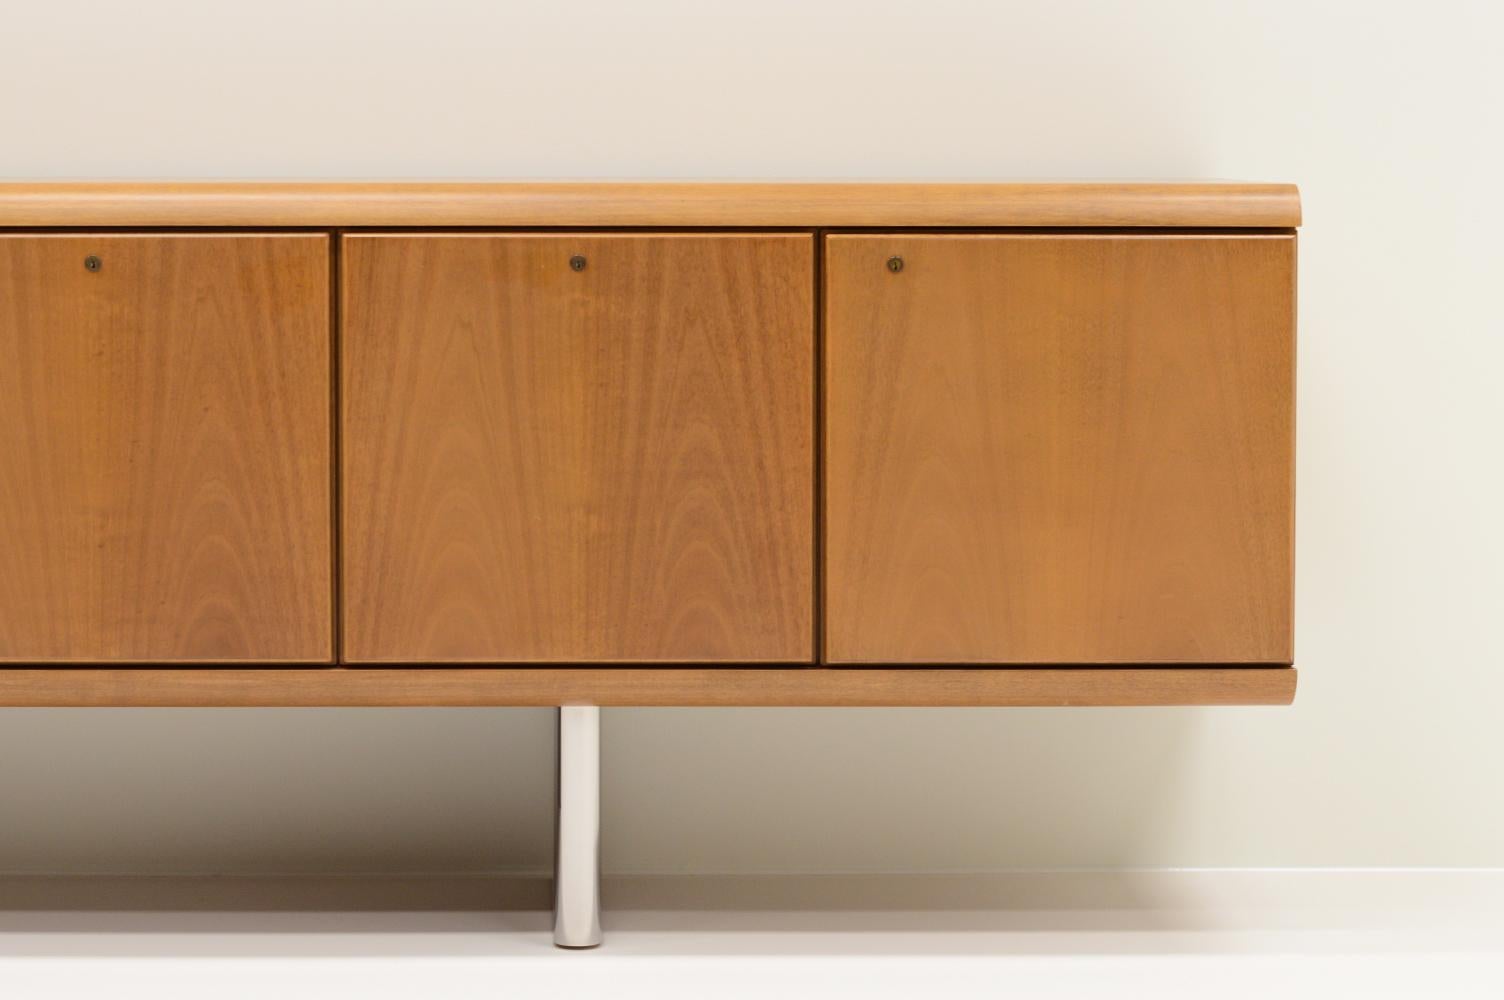 Large Mahogany Sideboard by Hans Von Klier for Skipper, Italy, 1970s For Sale 1